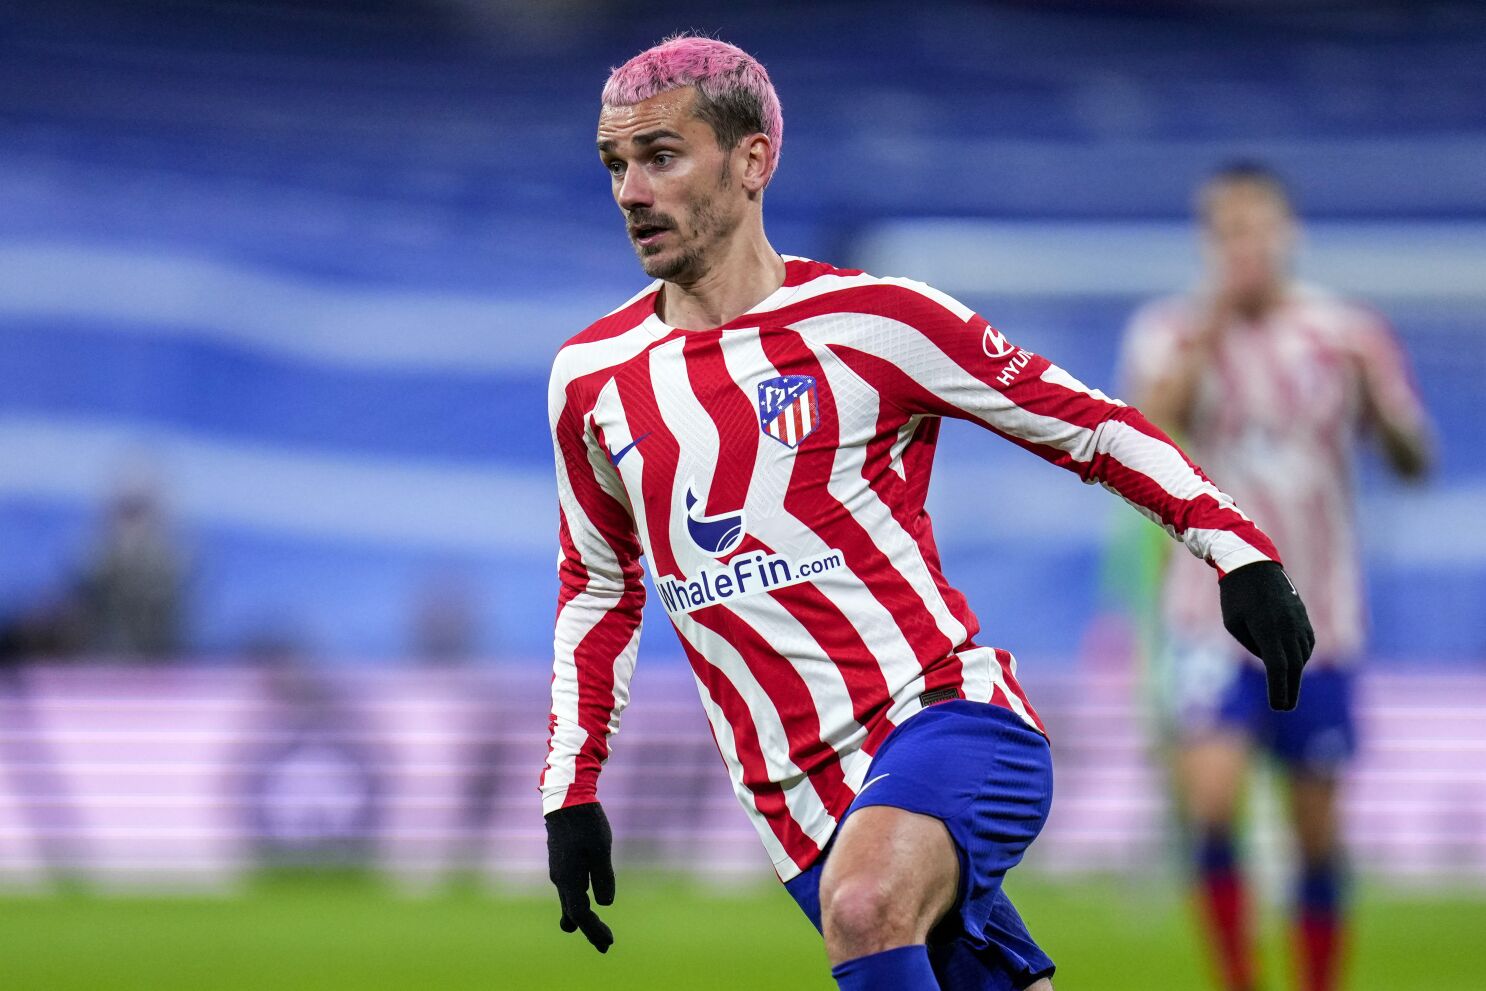 With Griezmann on fire, Atletico is hottest team in Spain - The San Diego Union-Tribune